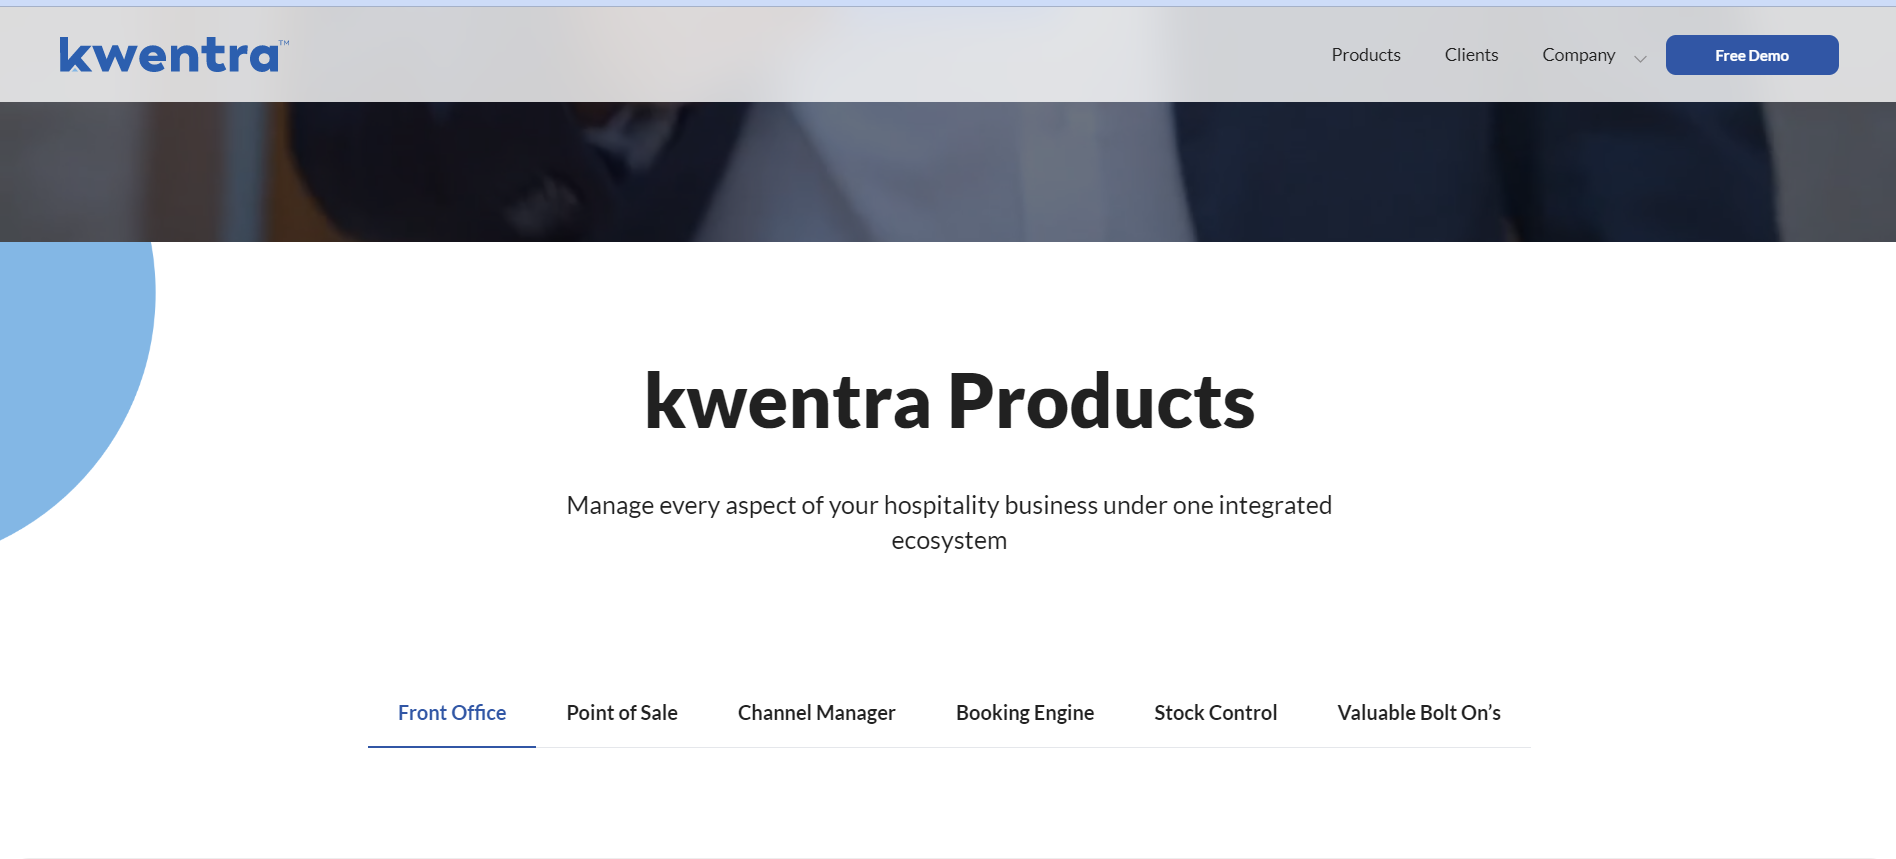 kwentra products